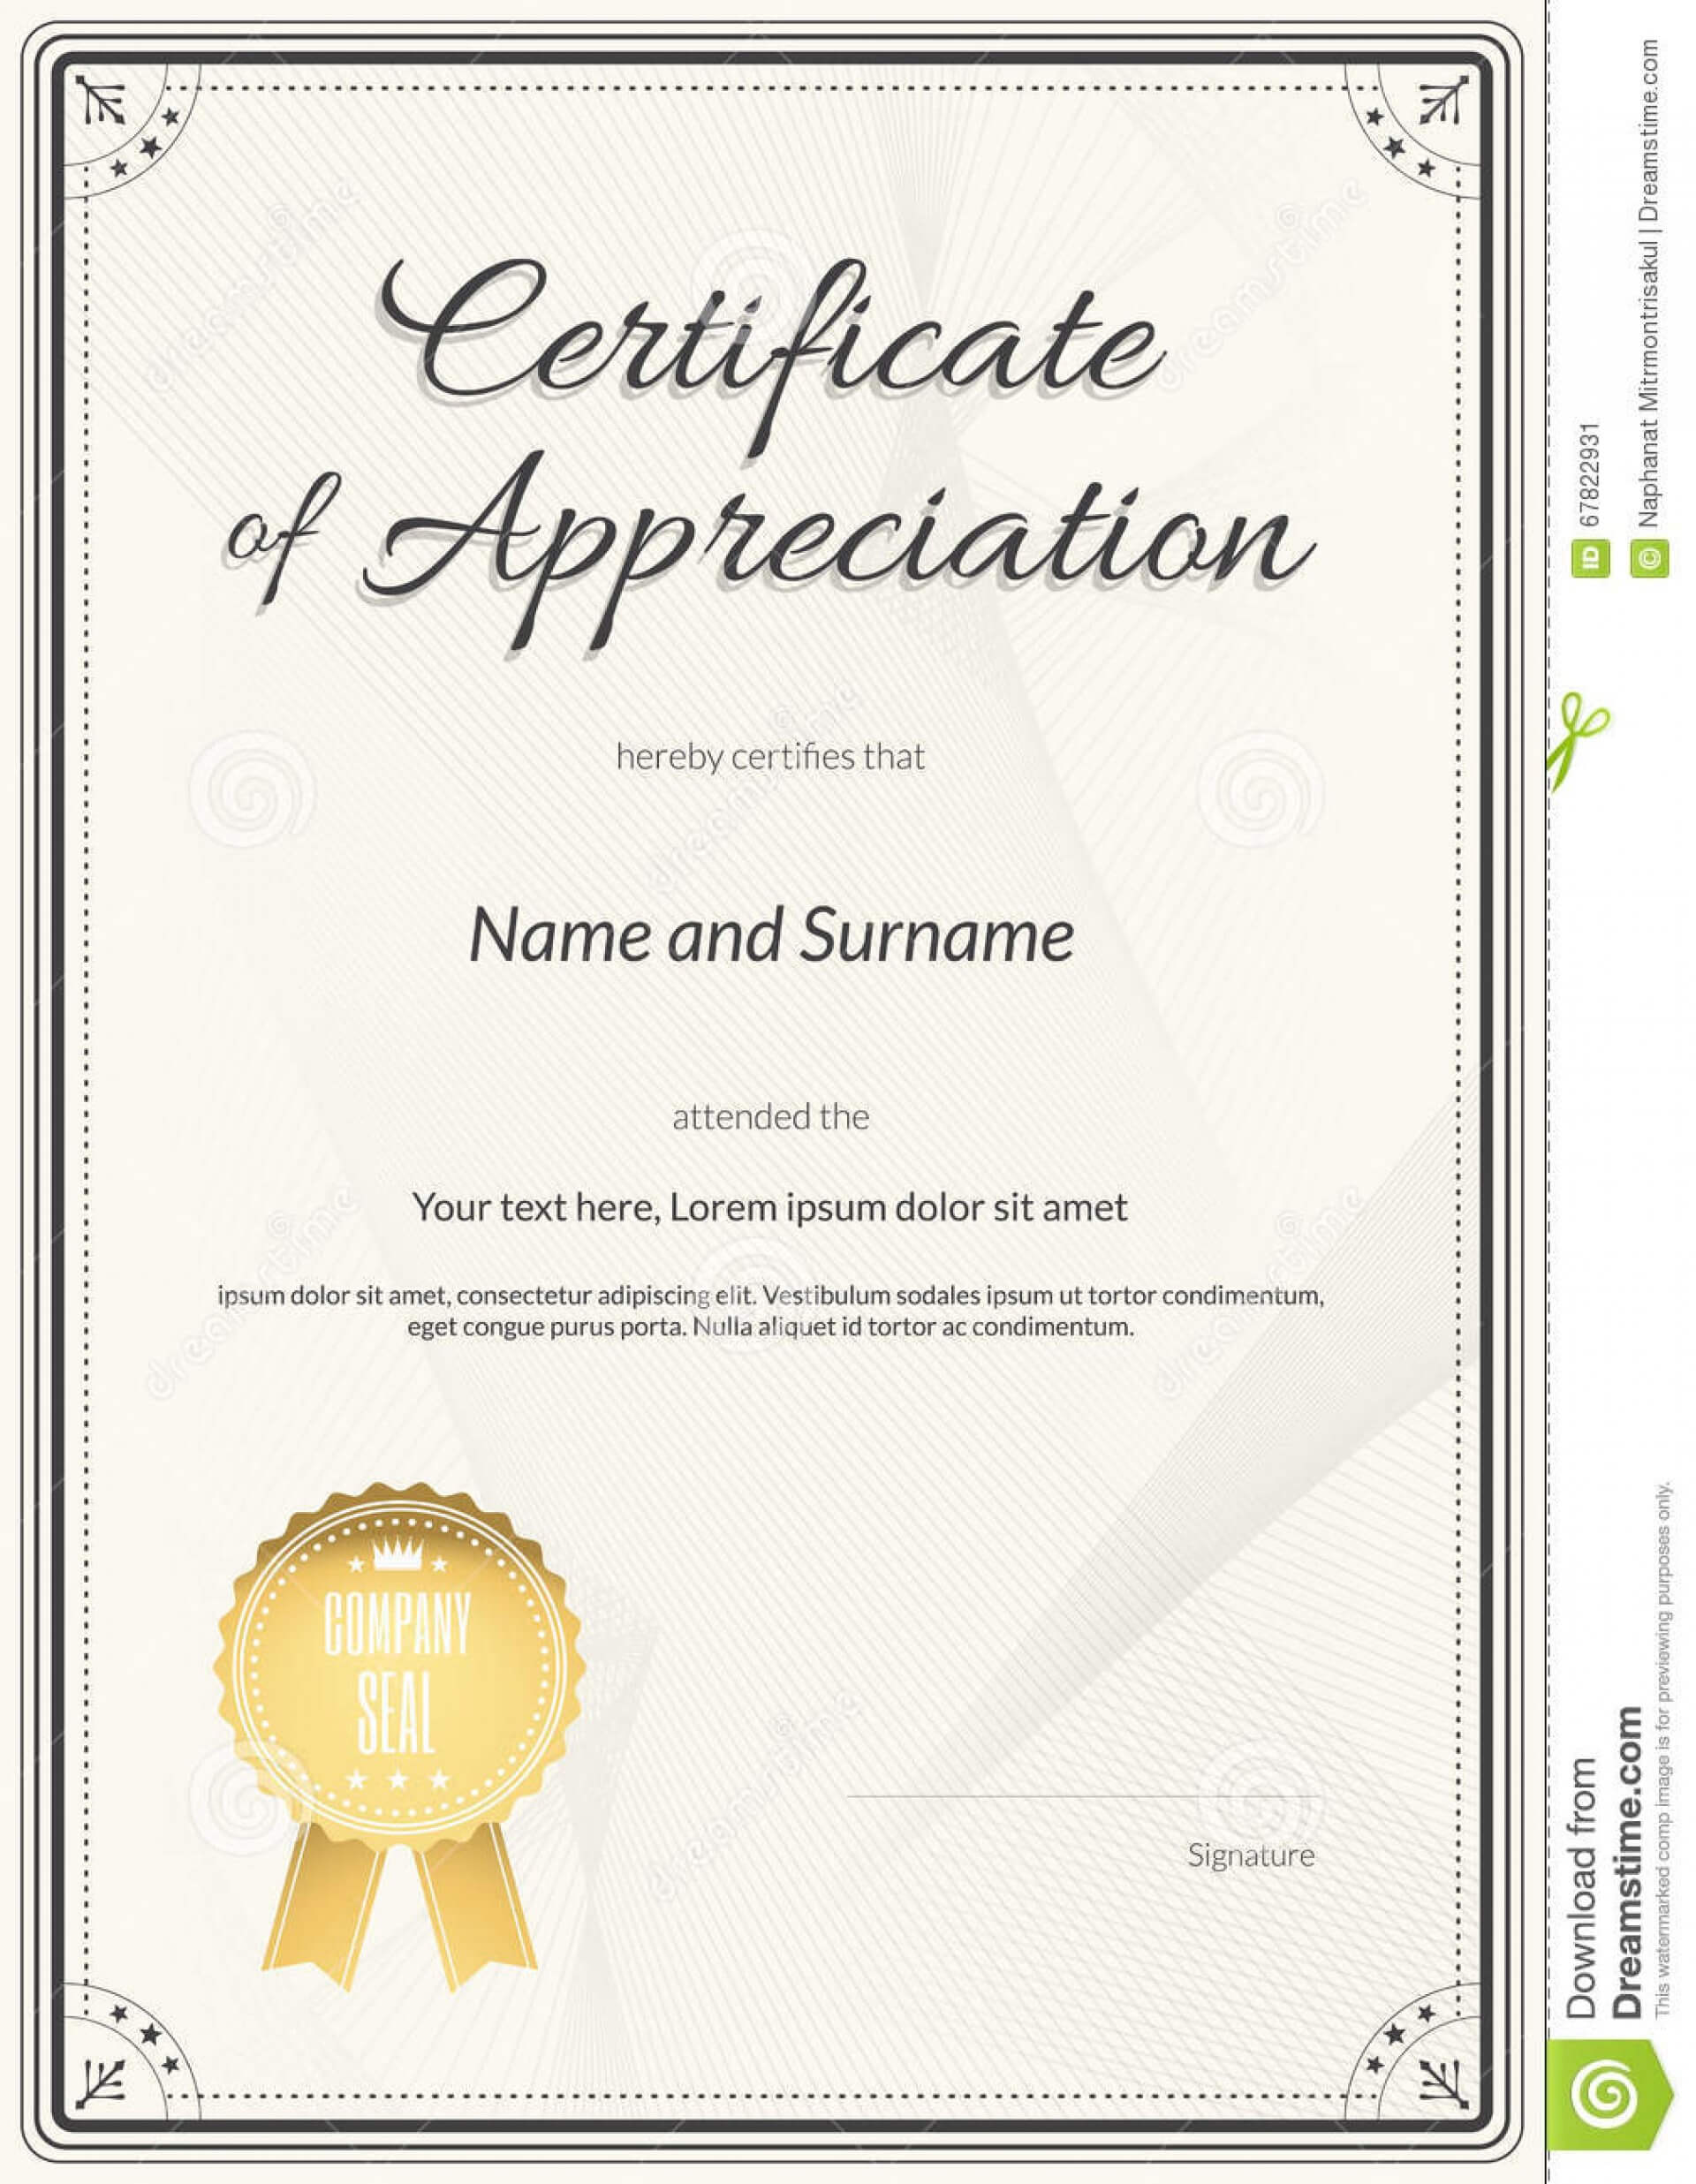 Army Certificate Of Appreciation Template Ppt Throughout Army Certificate Of Achievement Template